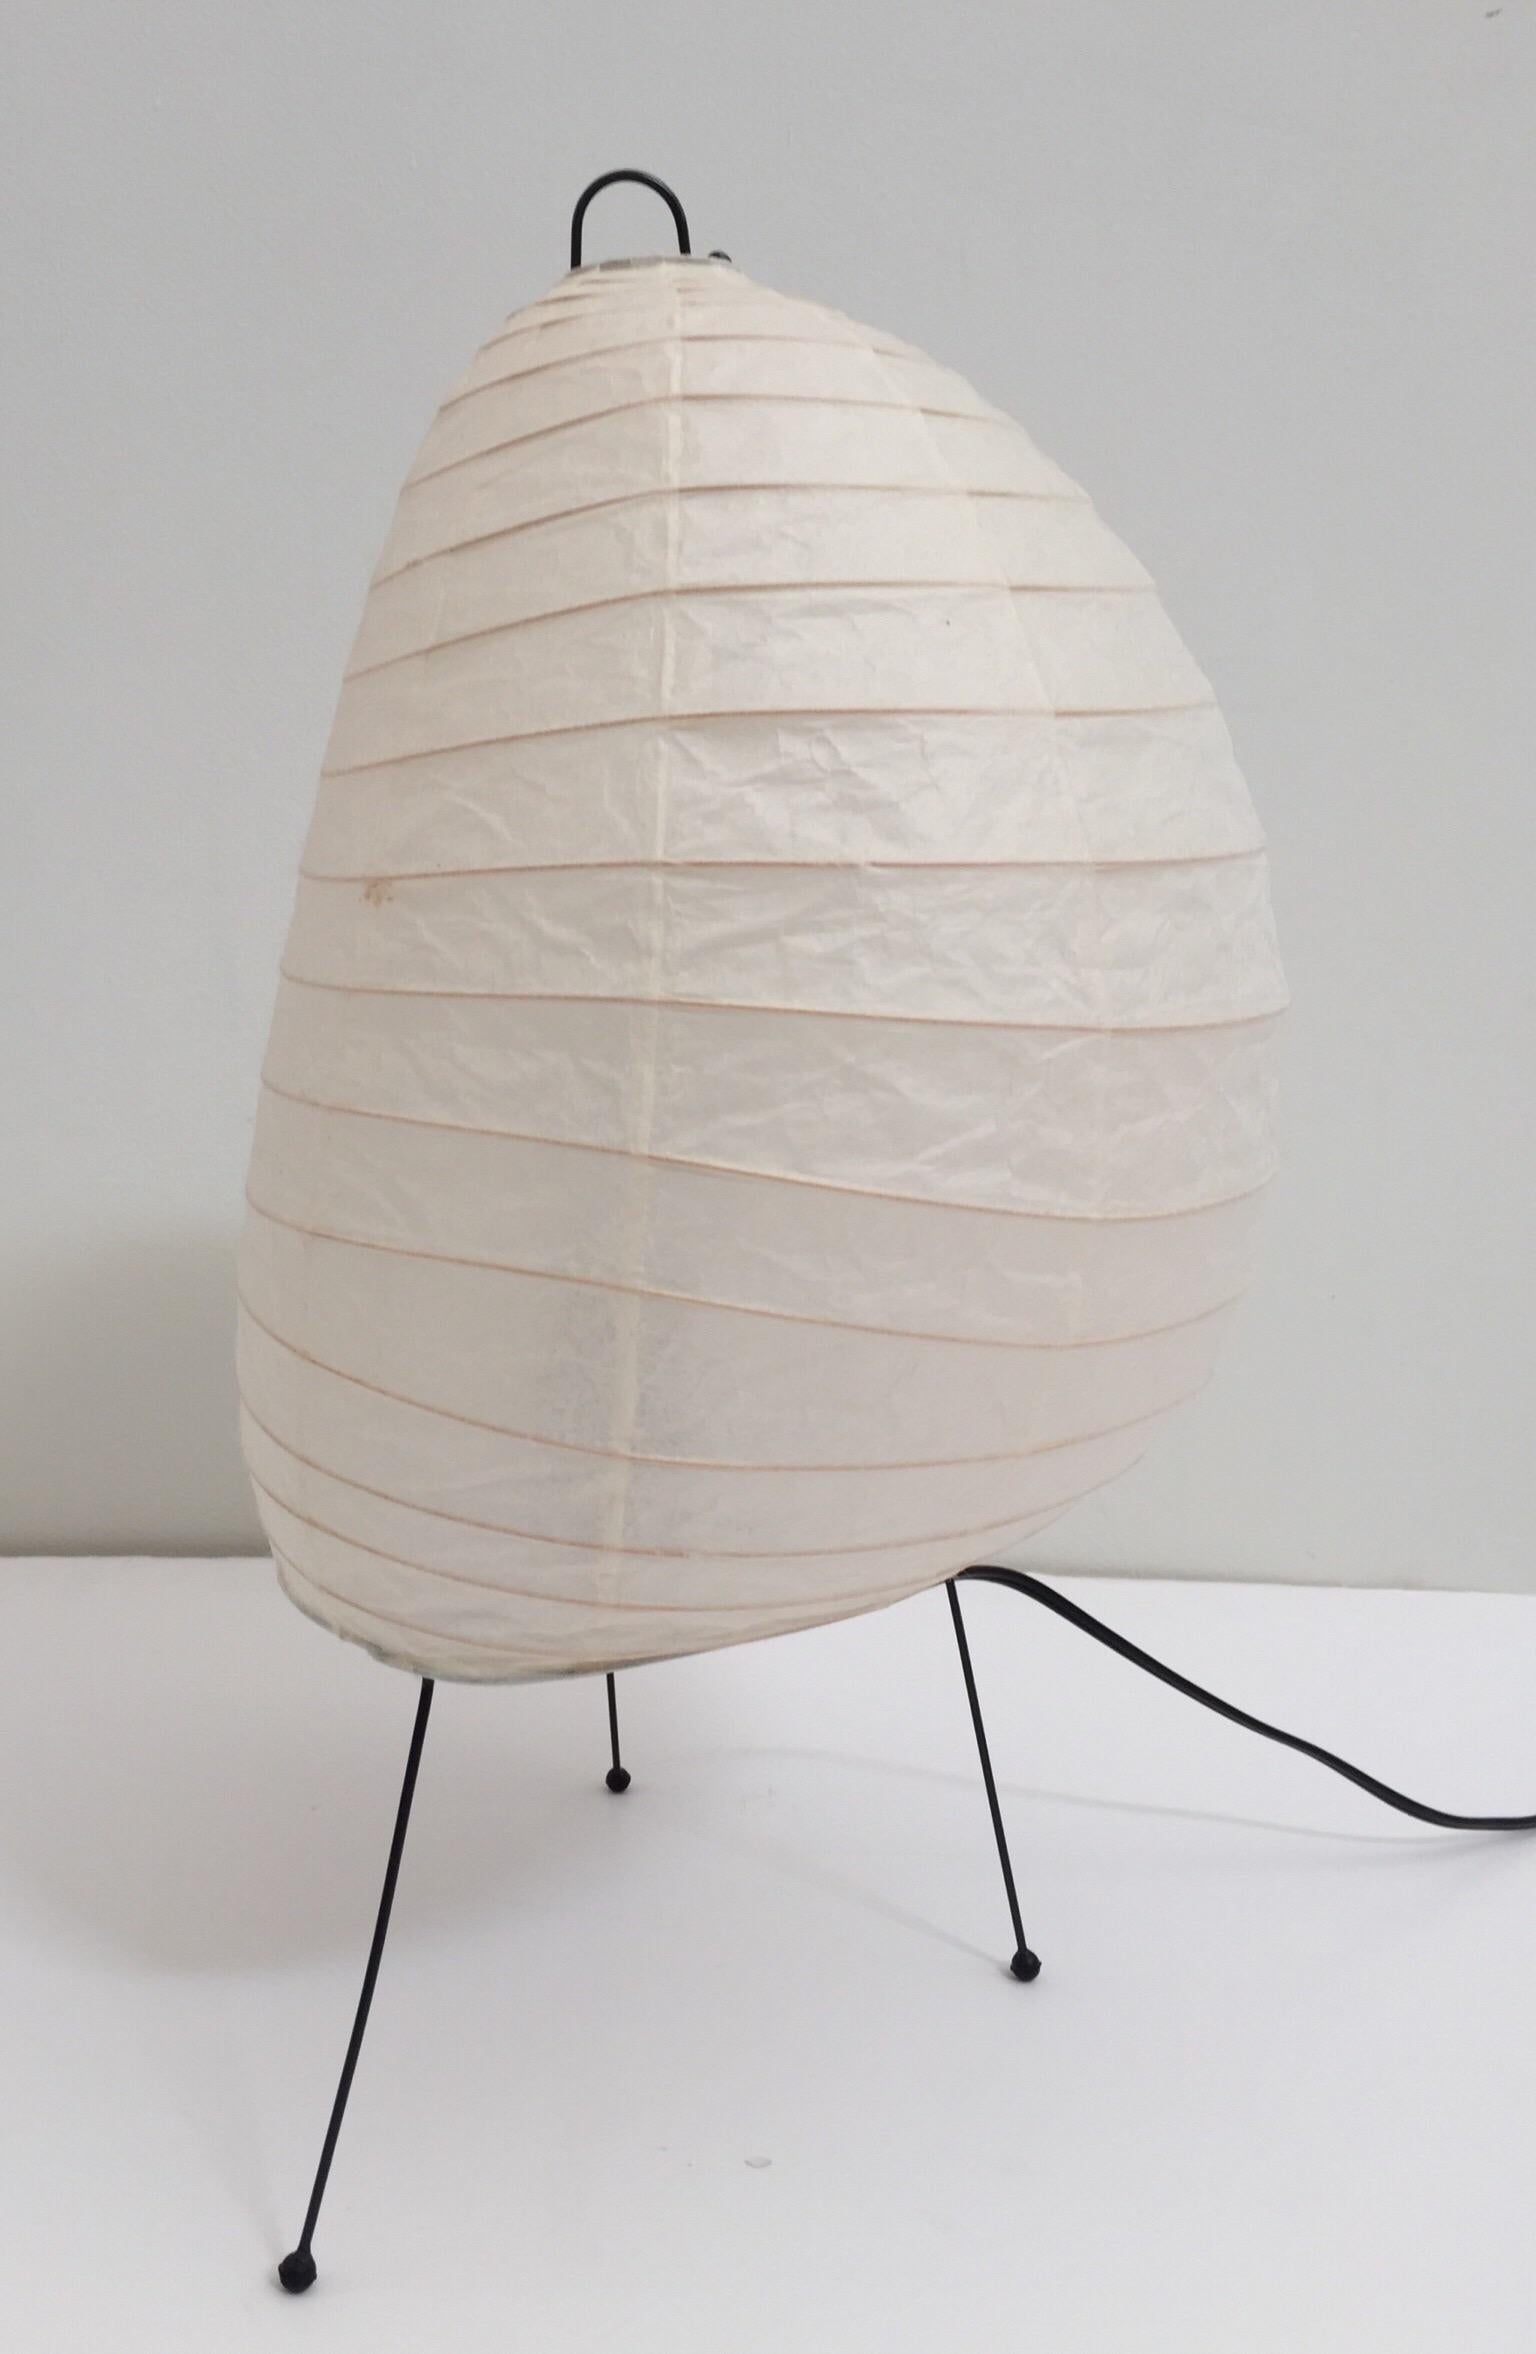 Vintage Akari lamp designed by Isamu Noguchi. 
The timeless Akari light sculpture by Isamu Noguchi design provides a sculptural form as well as a warm glowing source of light.
The shade is made from handmade washi paper and bamboo ribbing